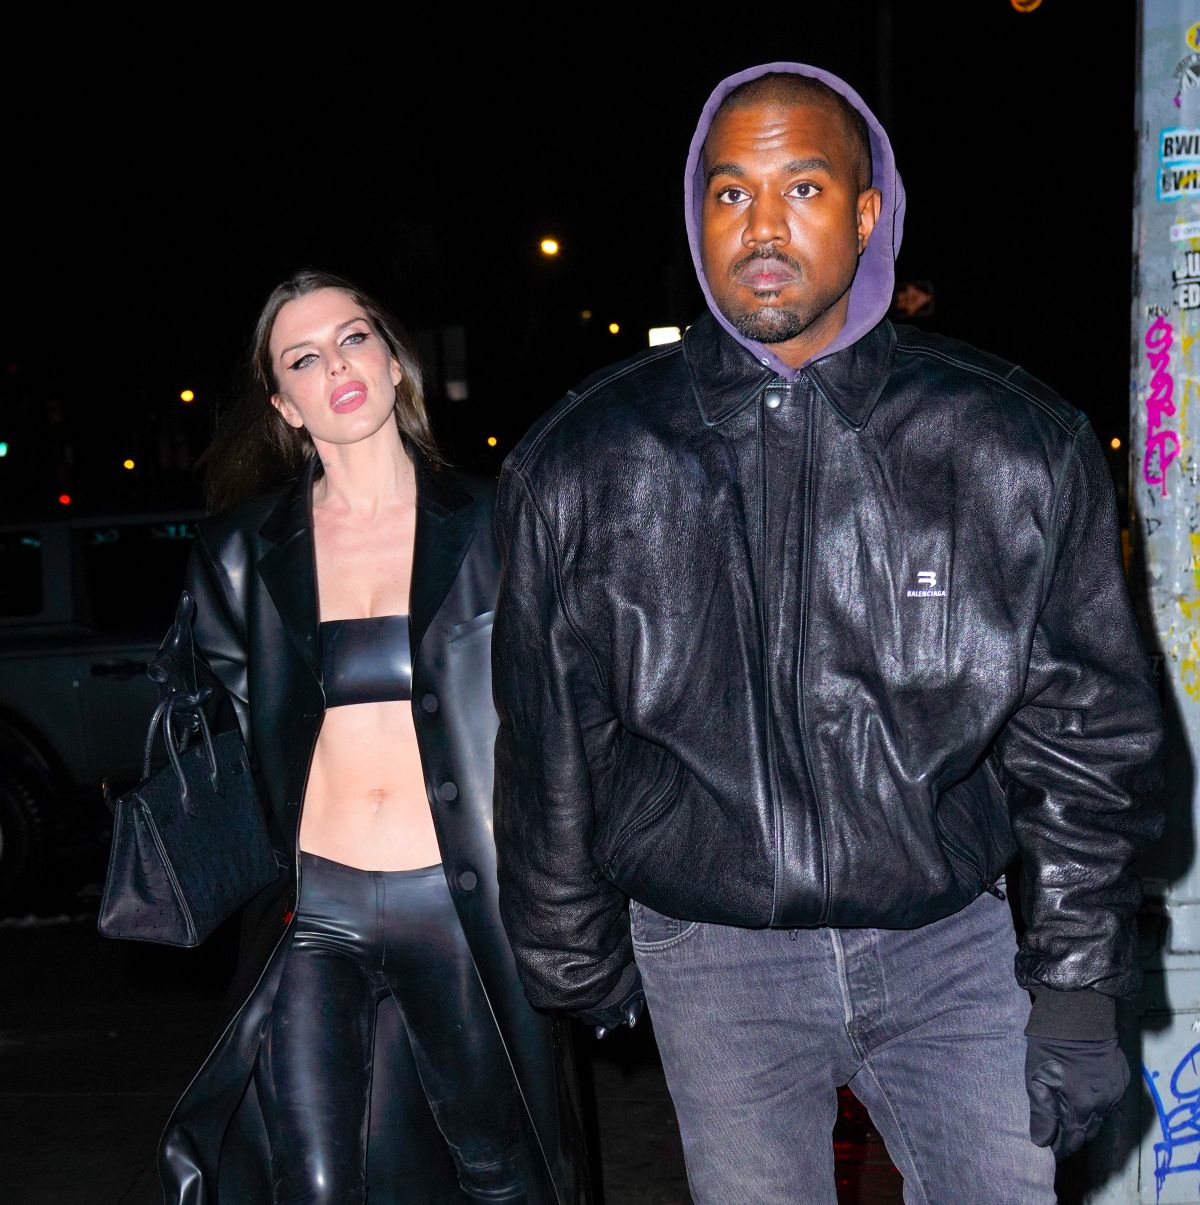 Julia Fox And Kanye West Arrives Lucien On Her 32nd Birthday New York